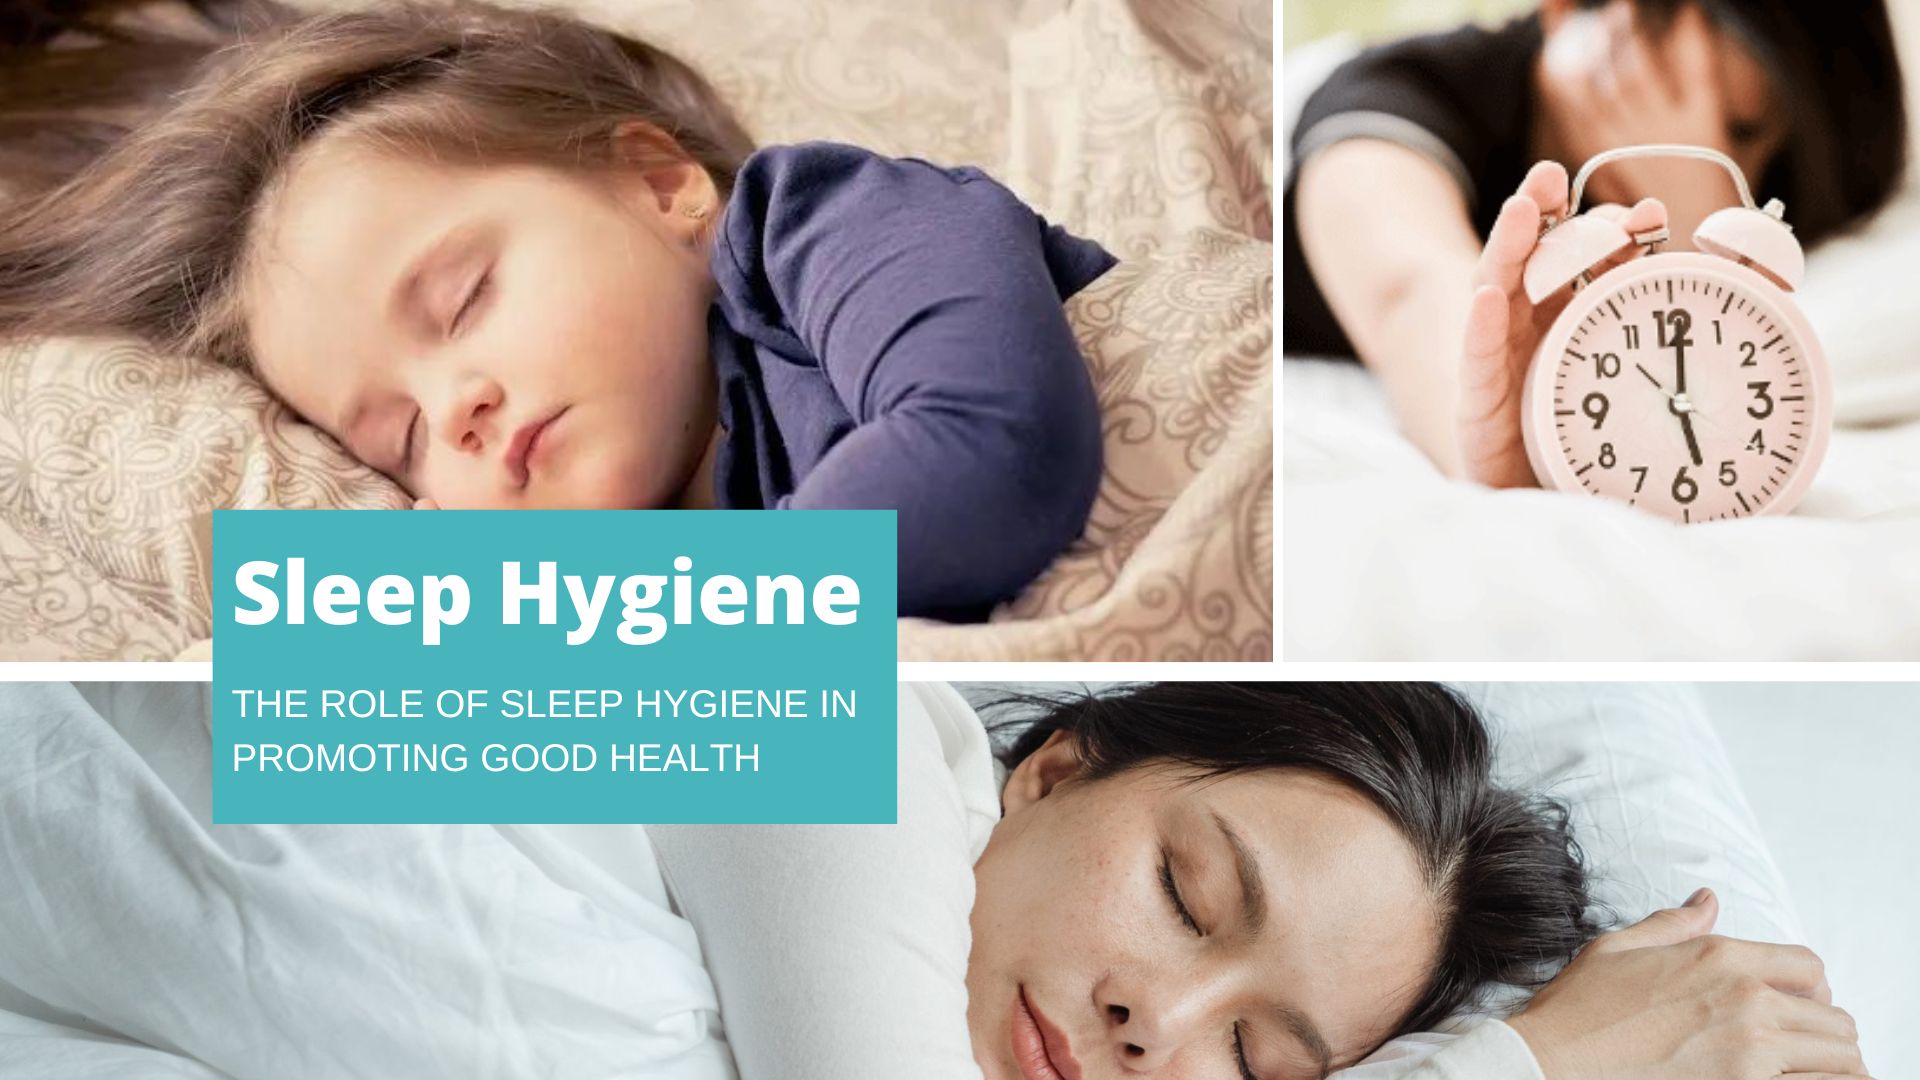 The Role of Sleep Hygiene in Promoting Good Health